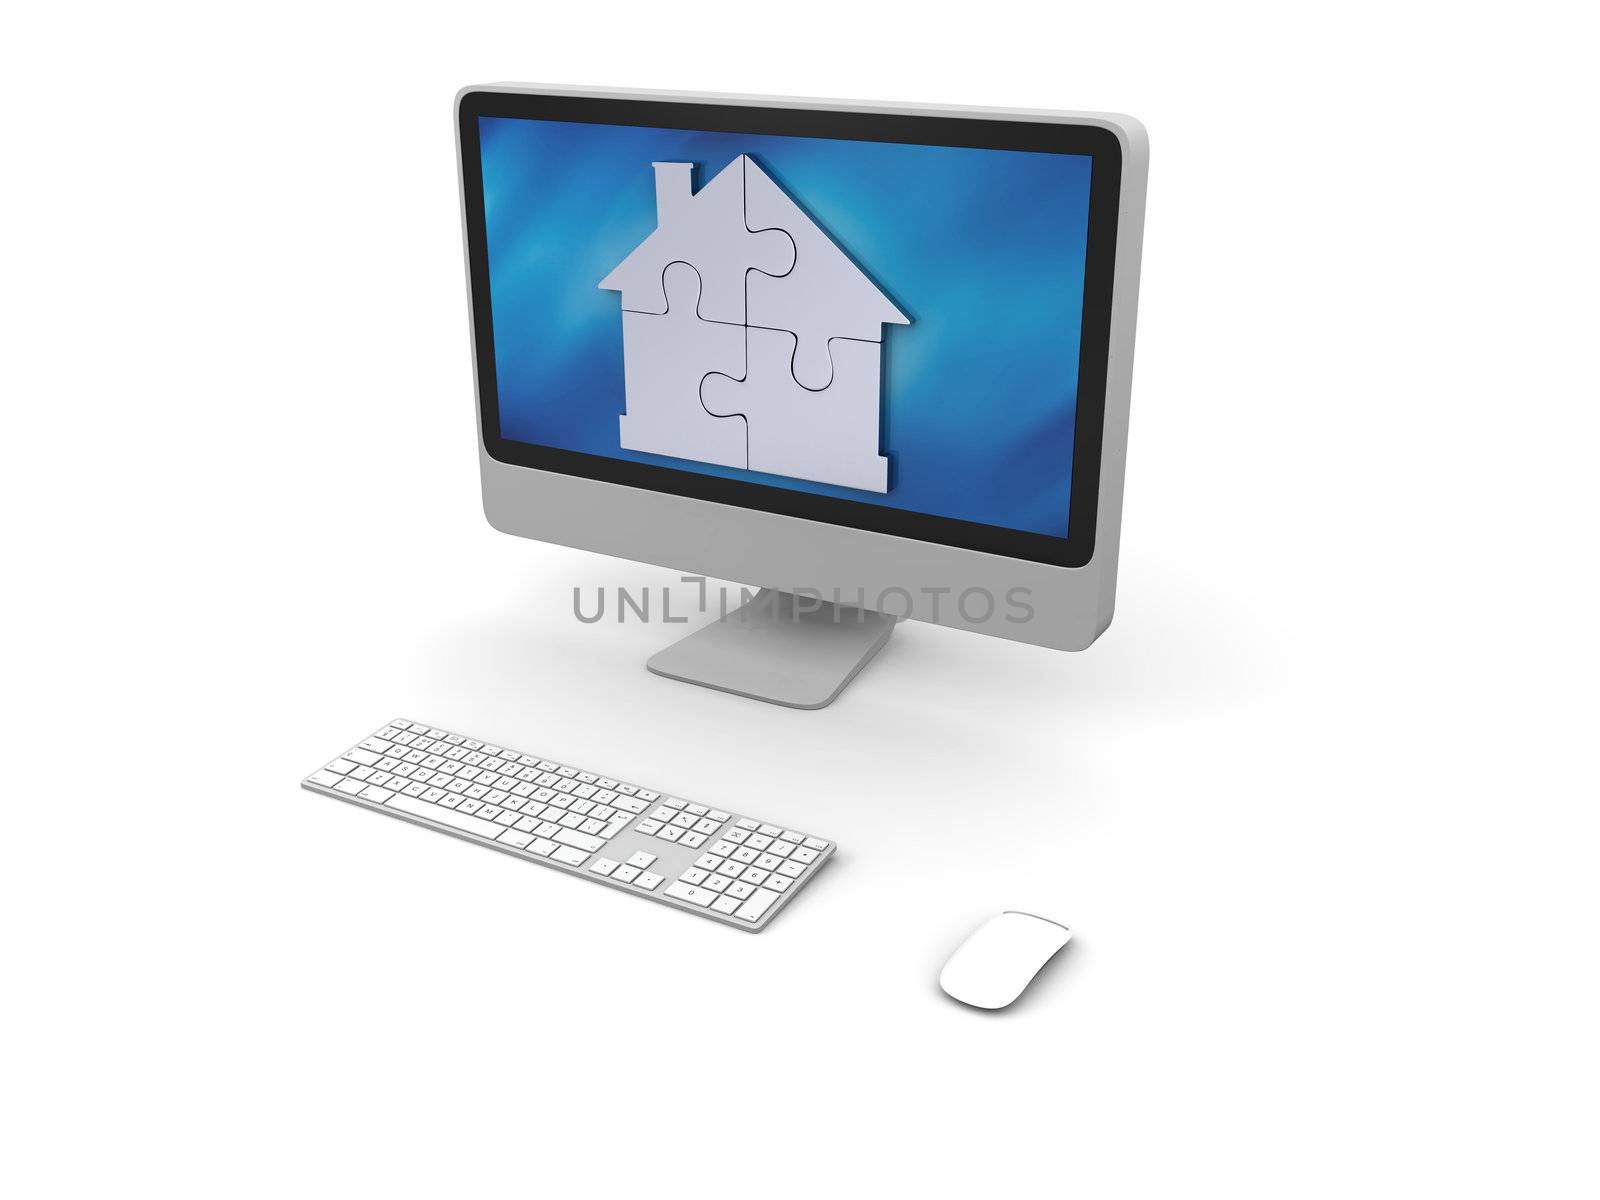 Puzzle in shape of house on computer screen by Harvepino